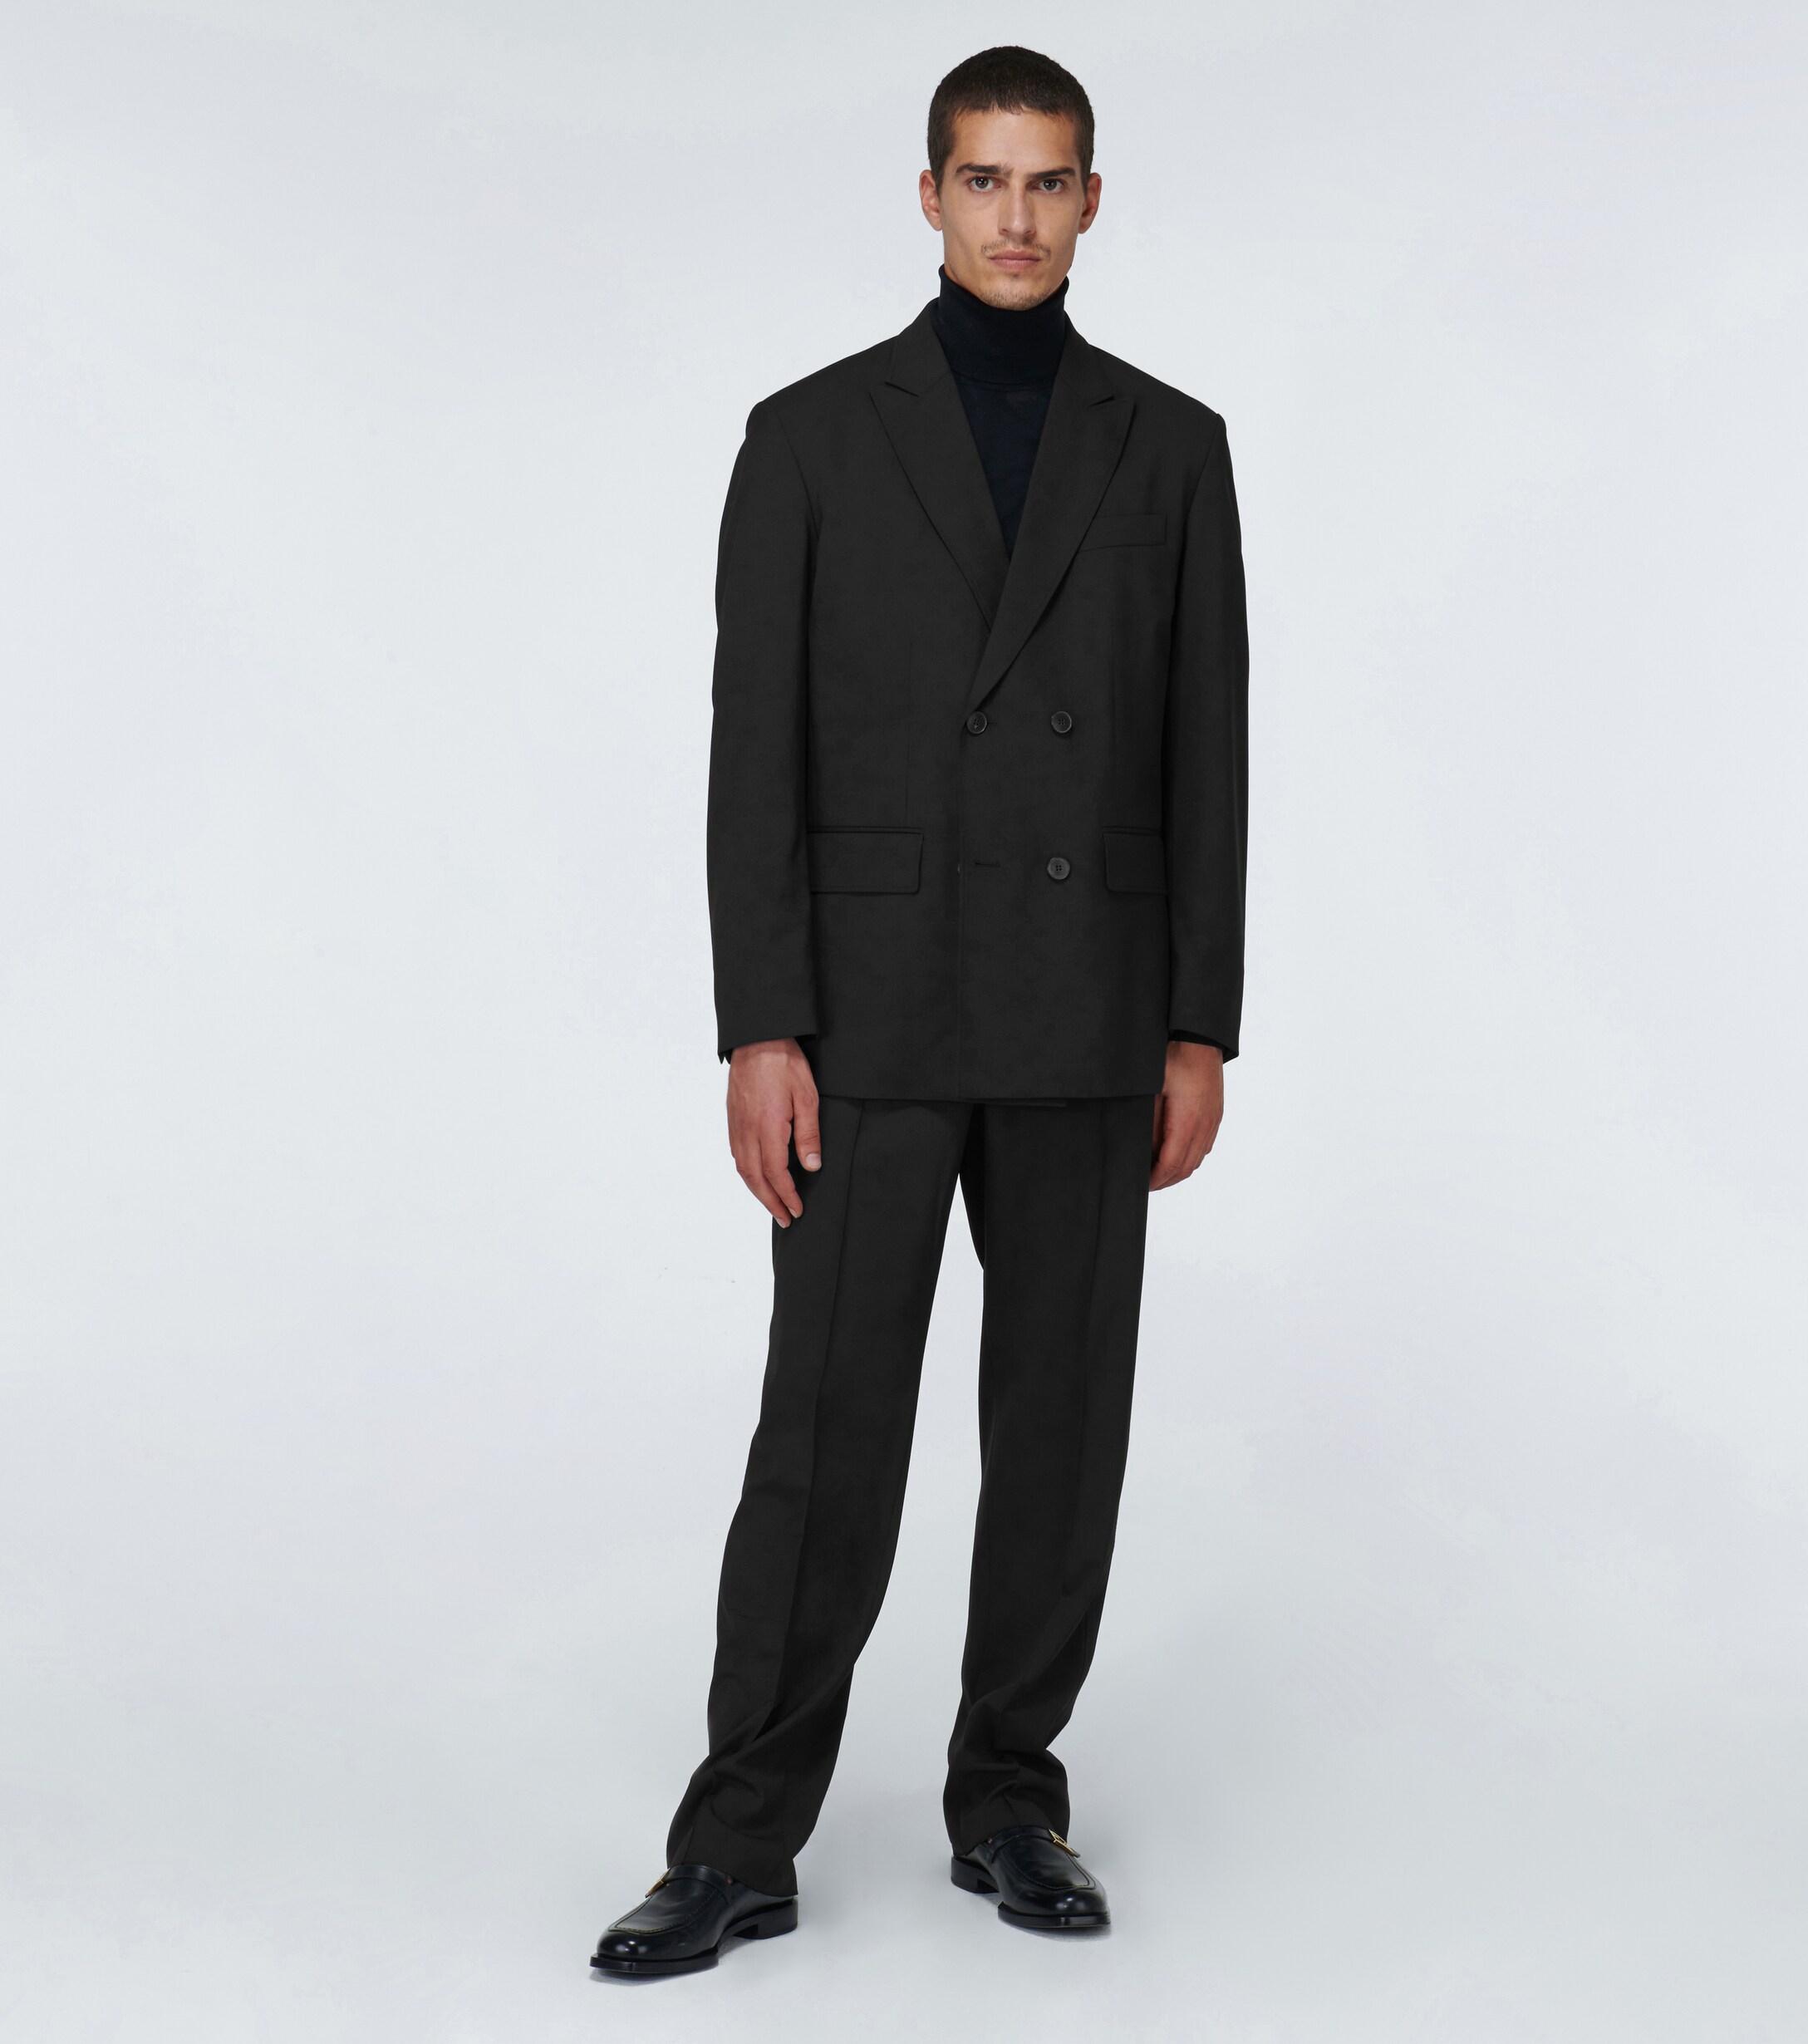 Valentino Double-breasted Wool-blend Blazer in Black for Men - Lyst